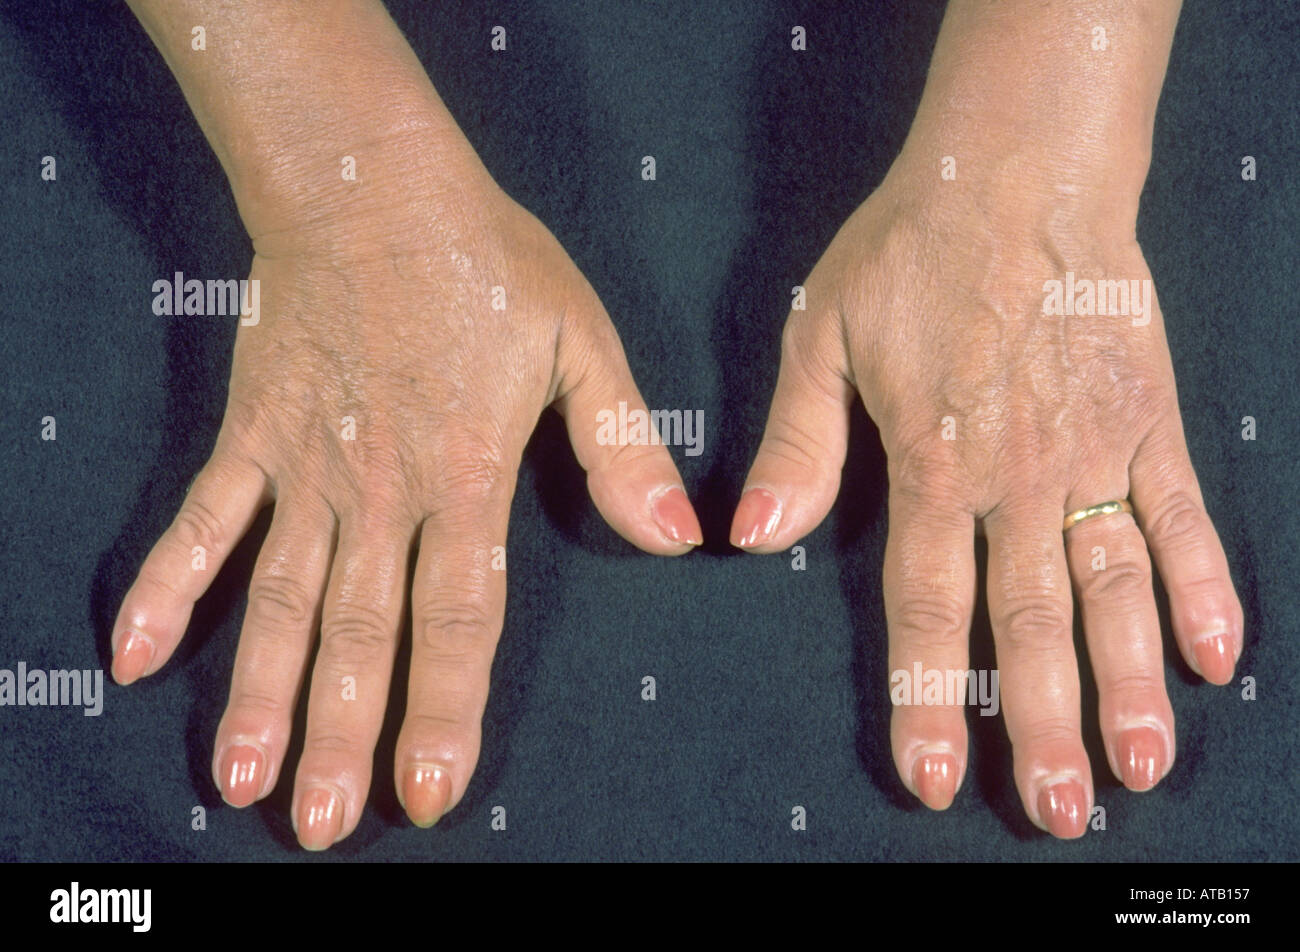 All the Causes of Nail Discoloration, and How to Treat Each Issue